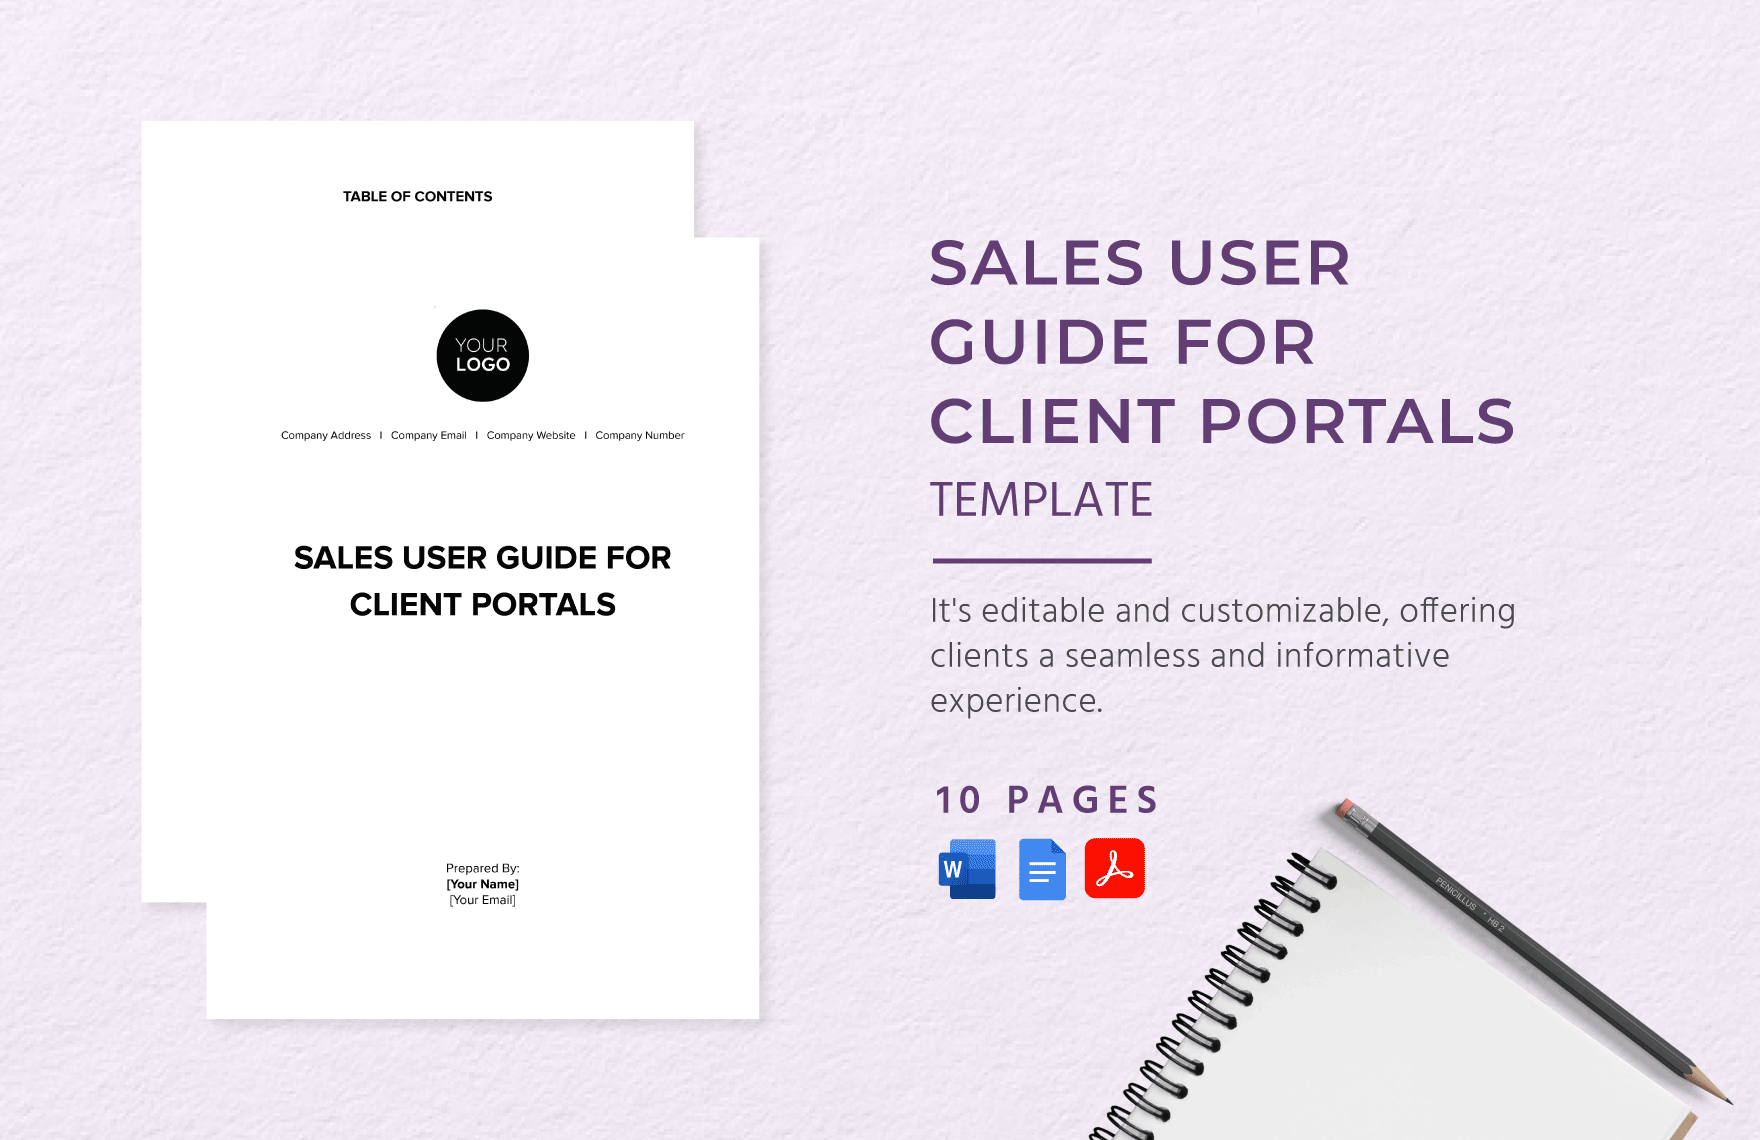 Sales User Guide for Client Portals Template in Word, Google Docs, PDF